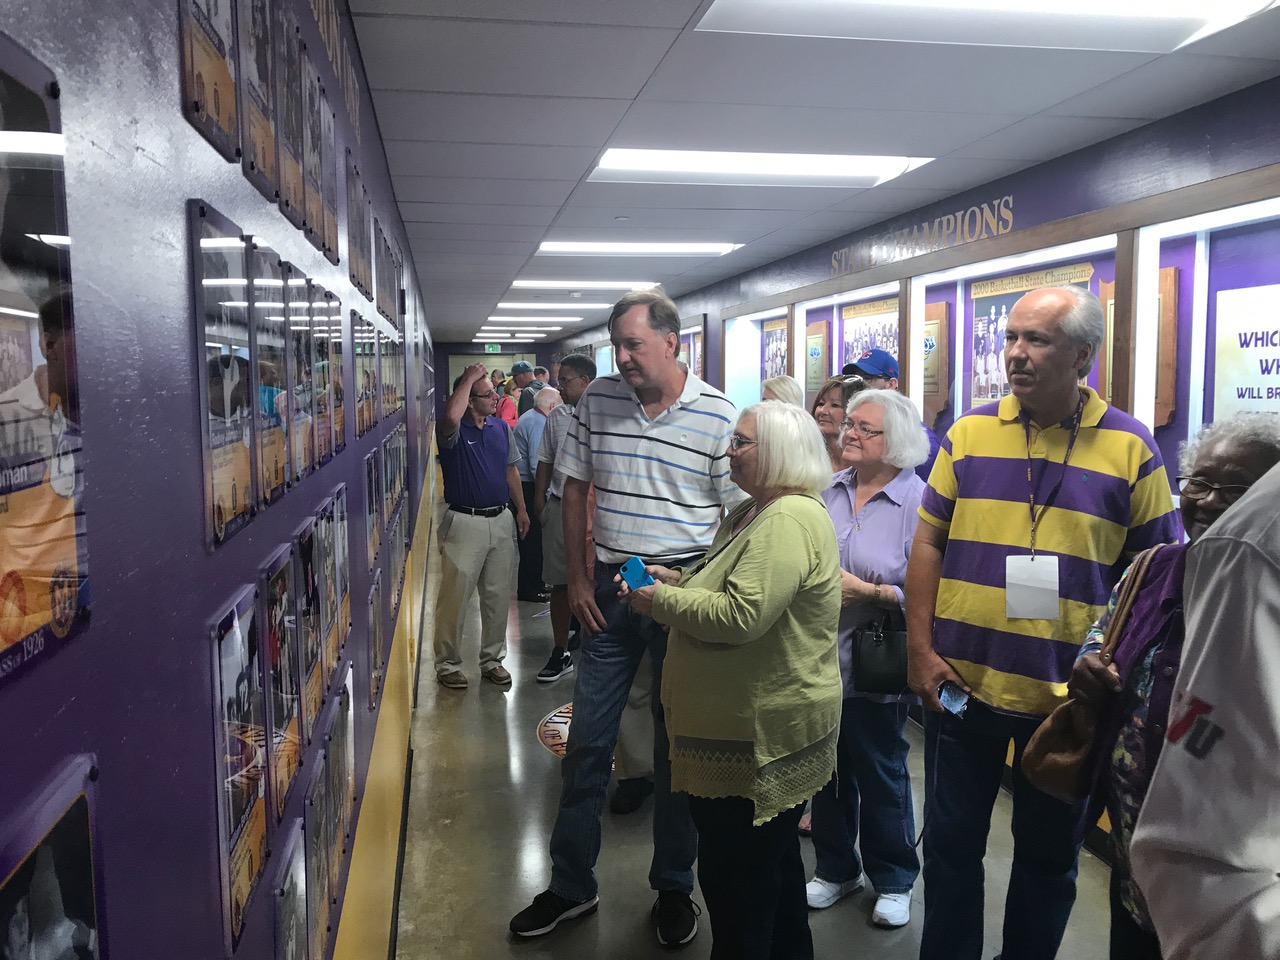 Visitors to the Athletics Hall of Fame